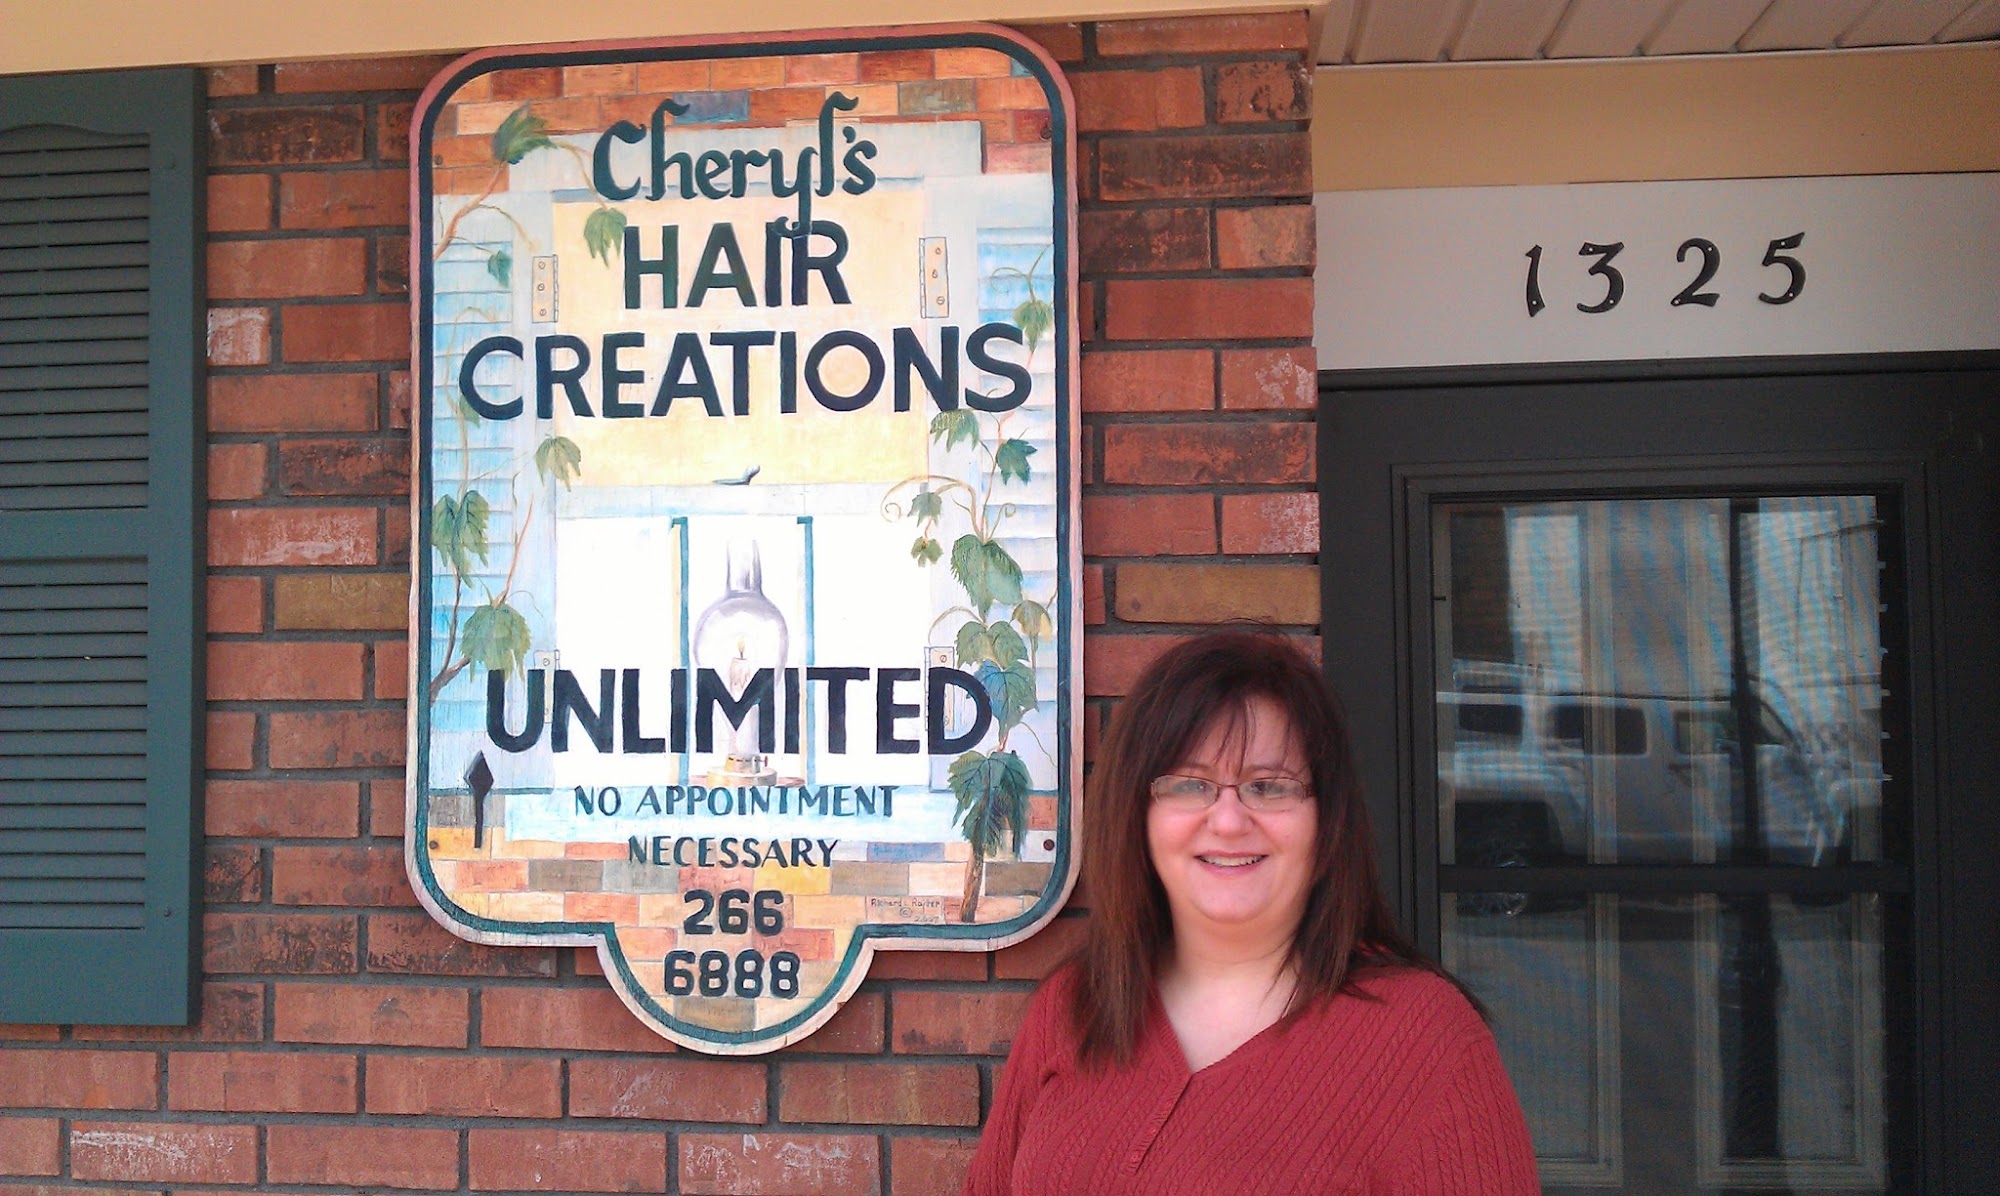 Cheryl's Hair Creations Unlimited